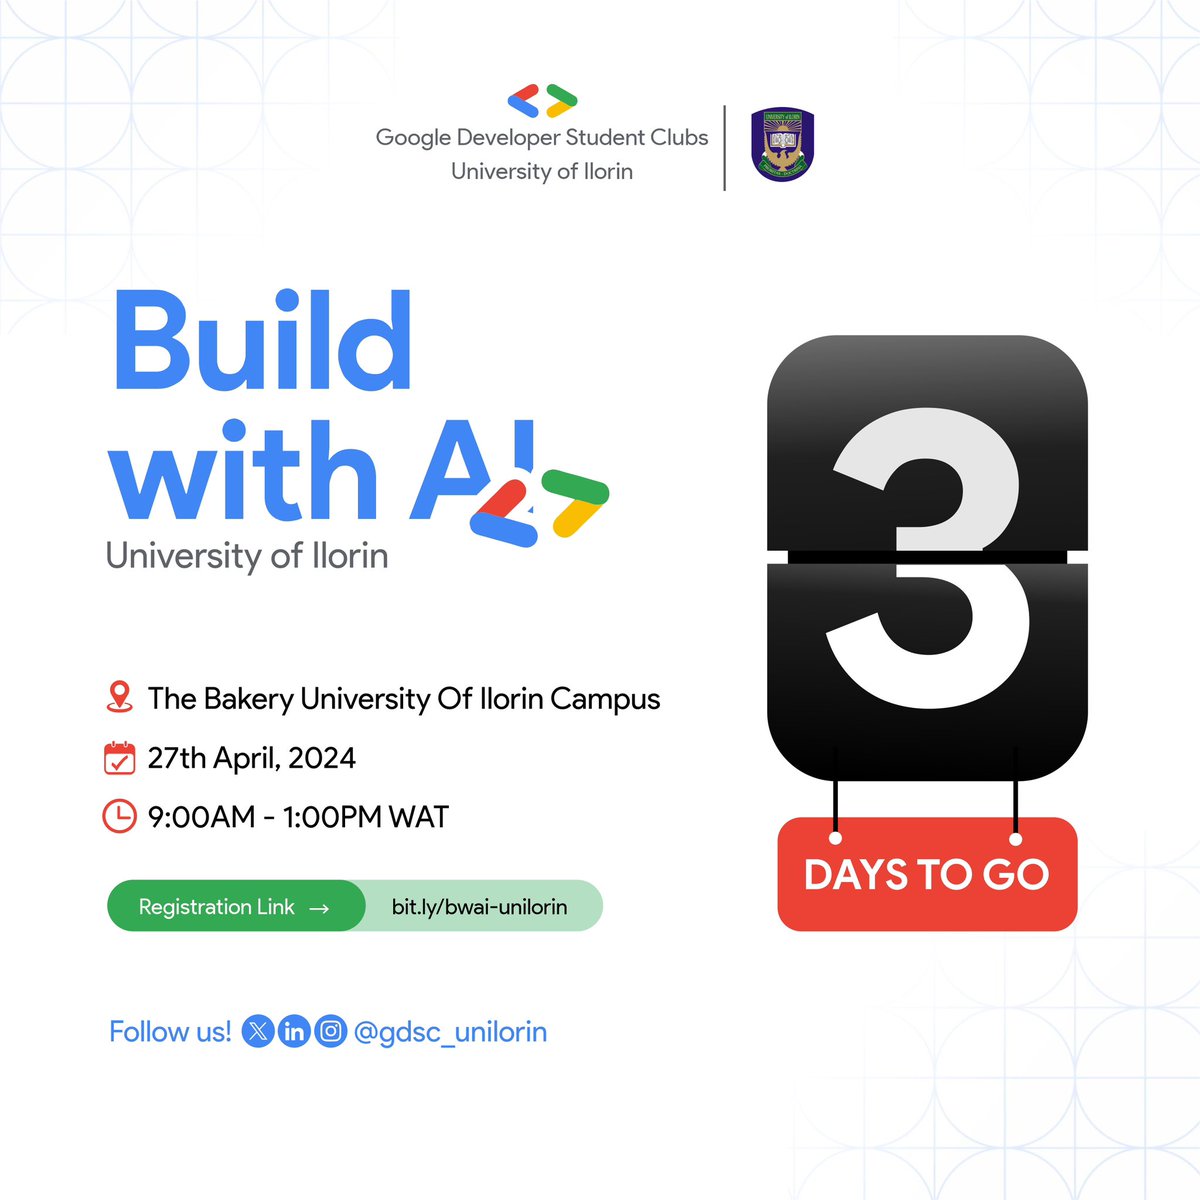 🎉🎉Only 3 days left! 🎉🎉 Are you prepared? Join us for an exciting event where we learn, engage, and connect with fellow enthusiasts. Don't miss out on this experience It's a chance to enhance your skills and make connections. #BuildWithAI #BuildwilthAIUnilorin